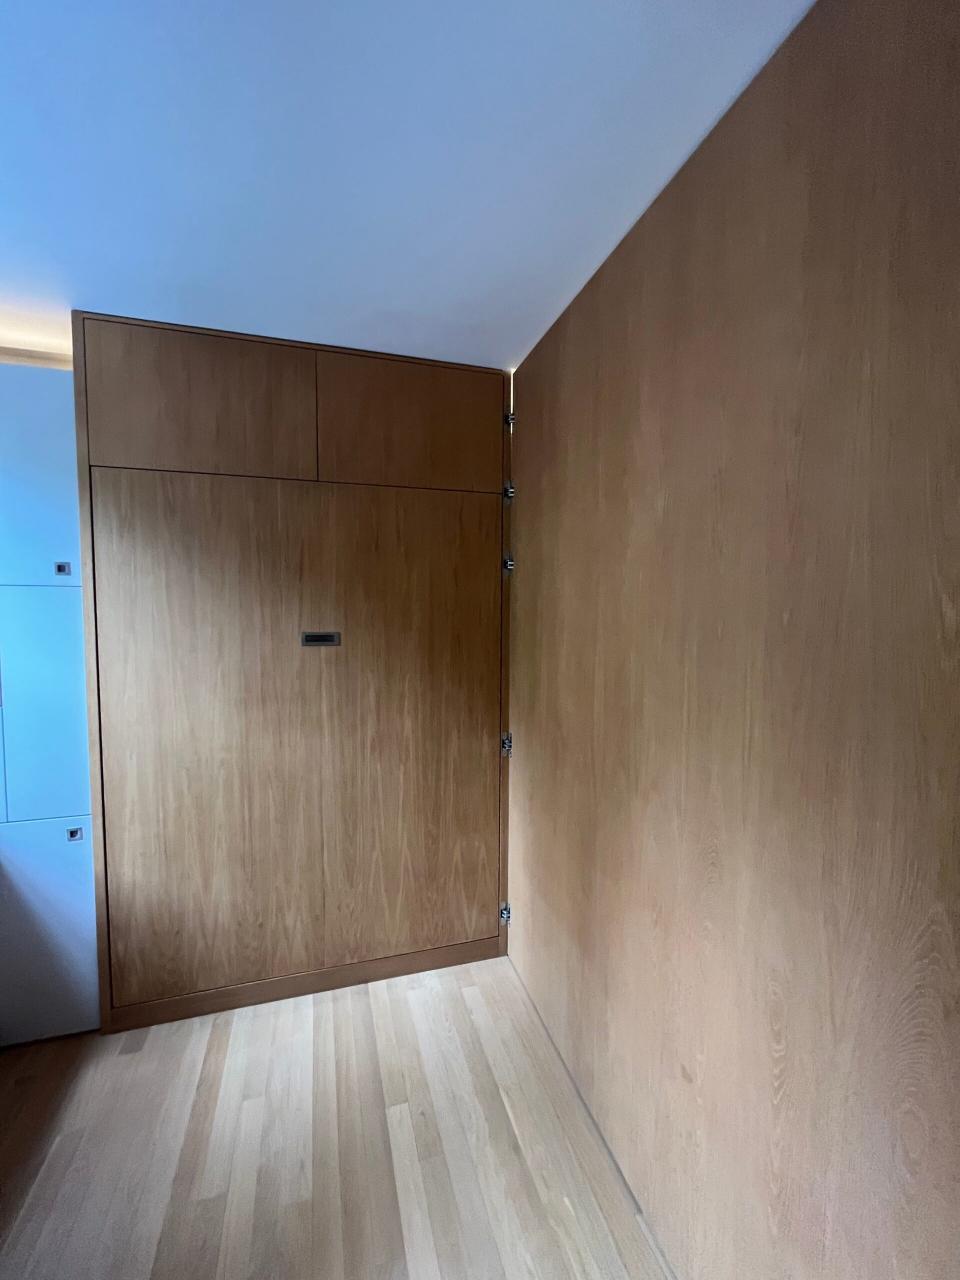 Inside the concealed bedroom with blonde wood walls 